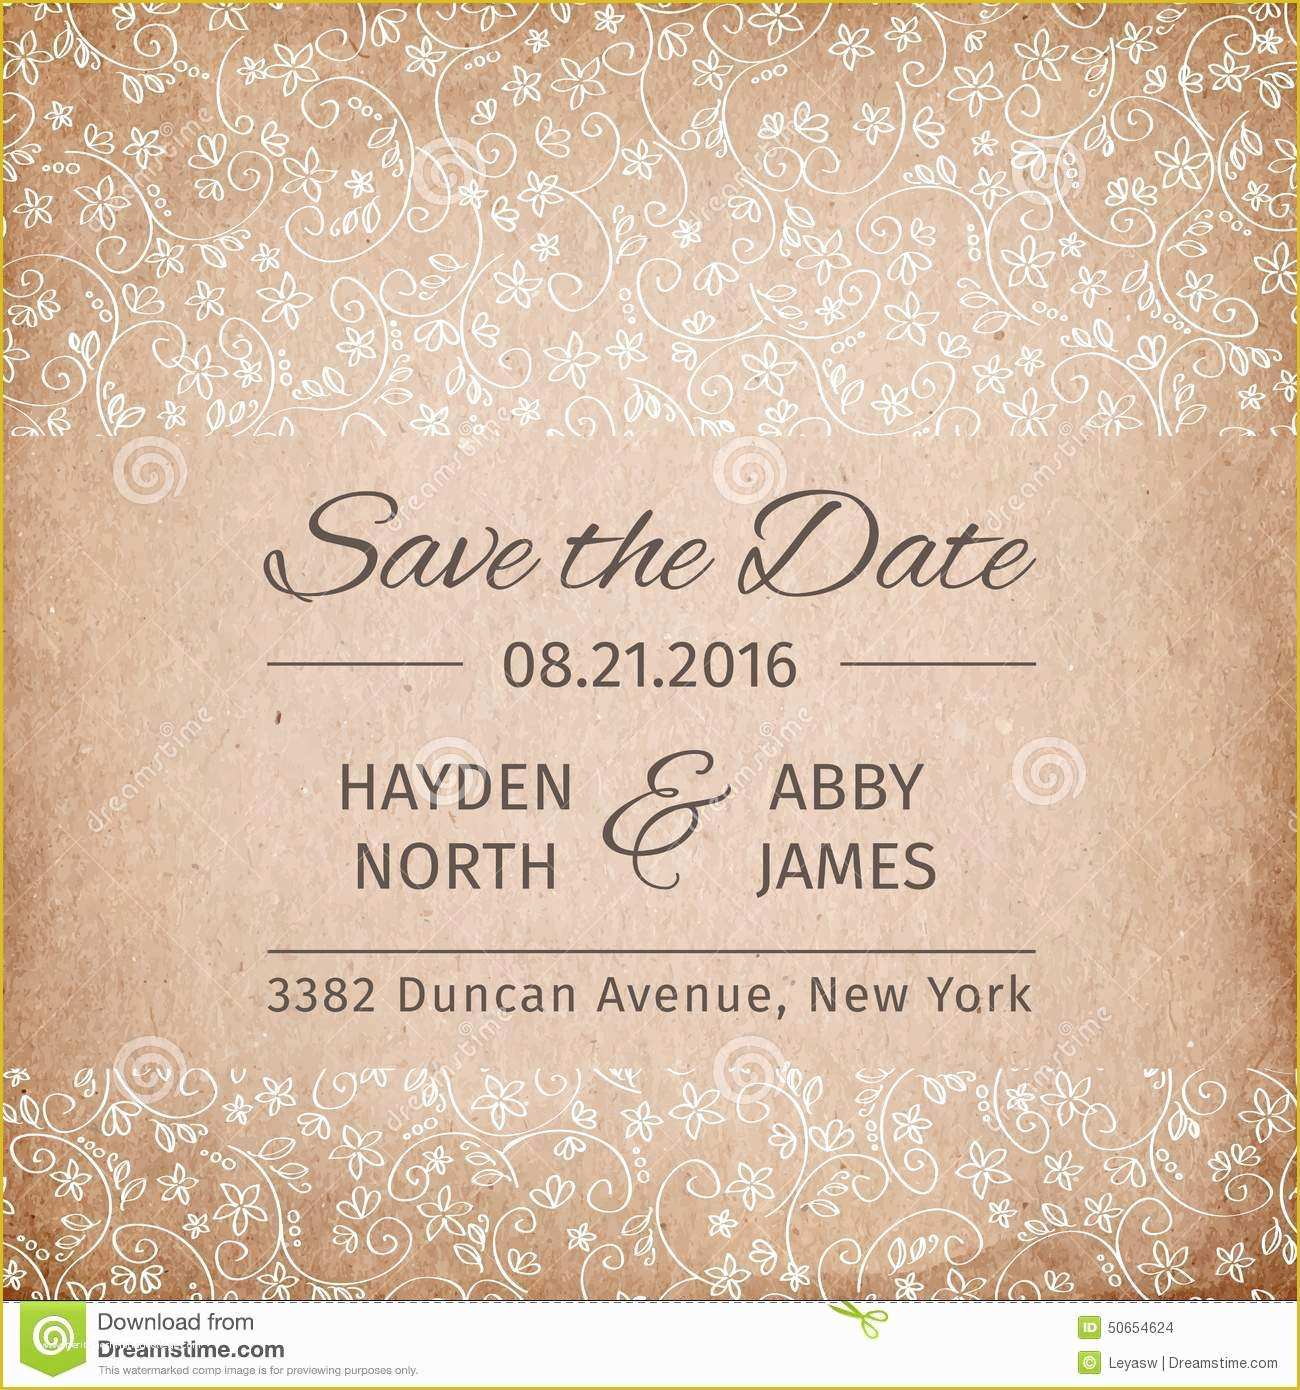 Save the Date Template Free Download Of Save the Date Wedding Invitation Template Vintage Paper